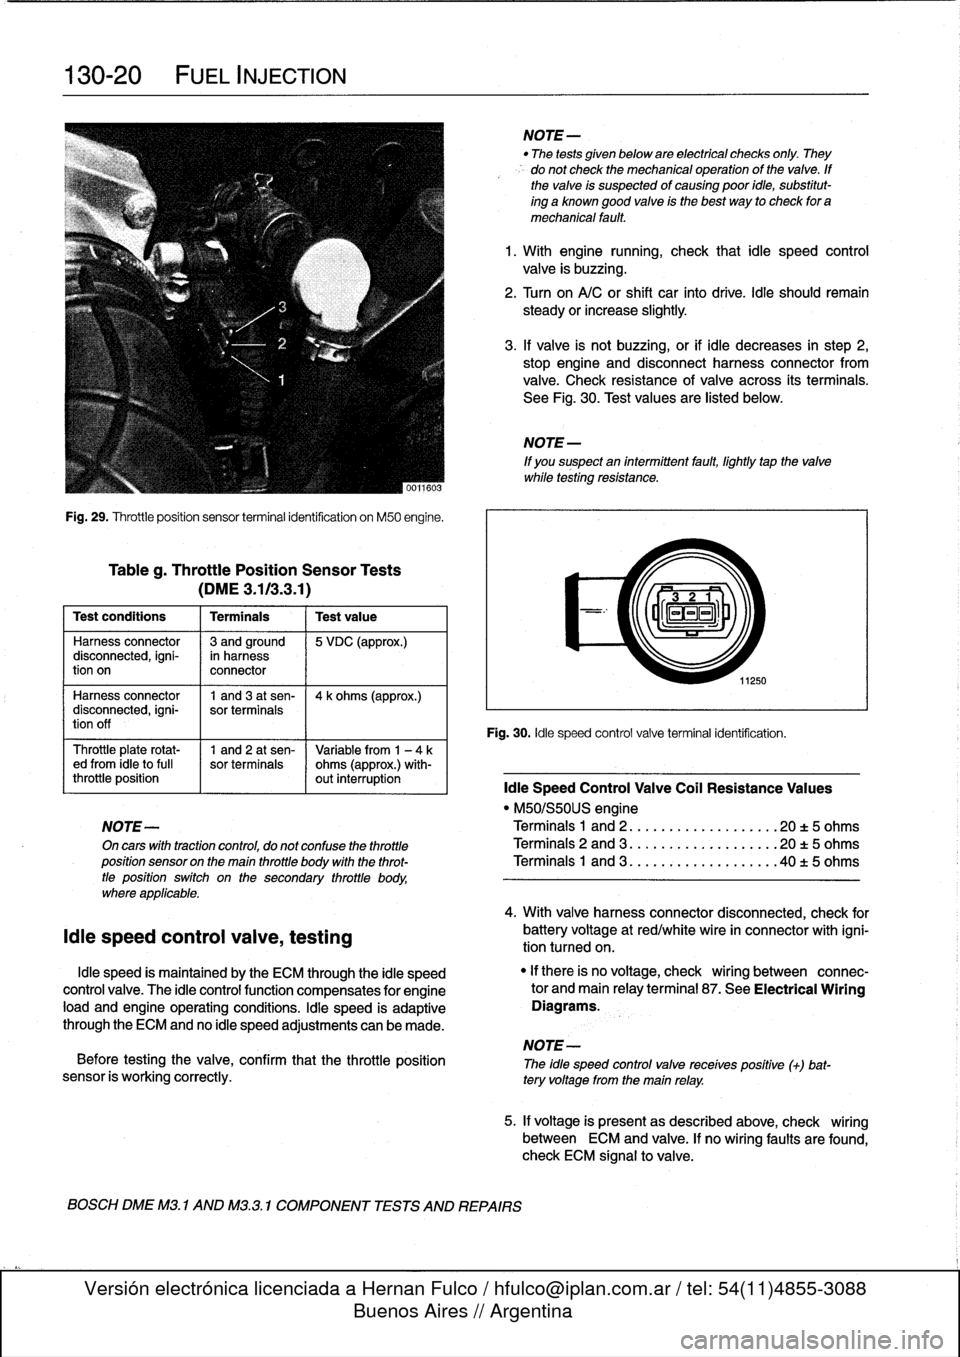 BMW 323i 1993 E36 Workshop Manual 
130-20

	

FUEL
INJECTION

Fig
.
29
.
Throttleposition
sensor
terminal
identification
on
M50
engine
.

Tableg
.
Throttle
Position
Sensor
Tests

(DME3
.113
.3
.1)

Test
conditions

	

I
Terminals

	

